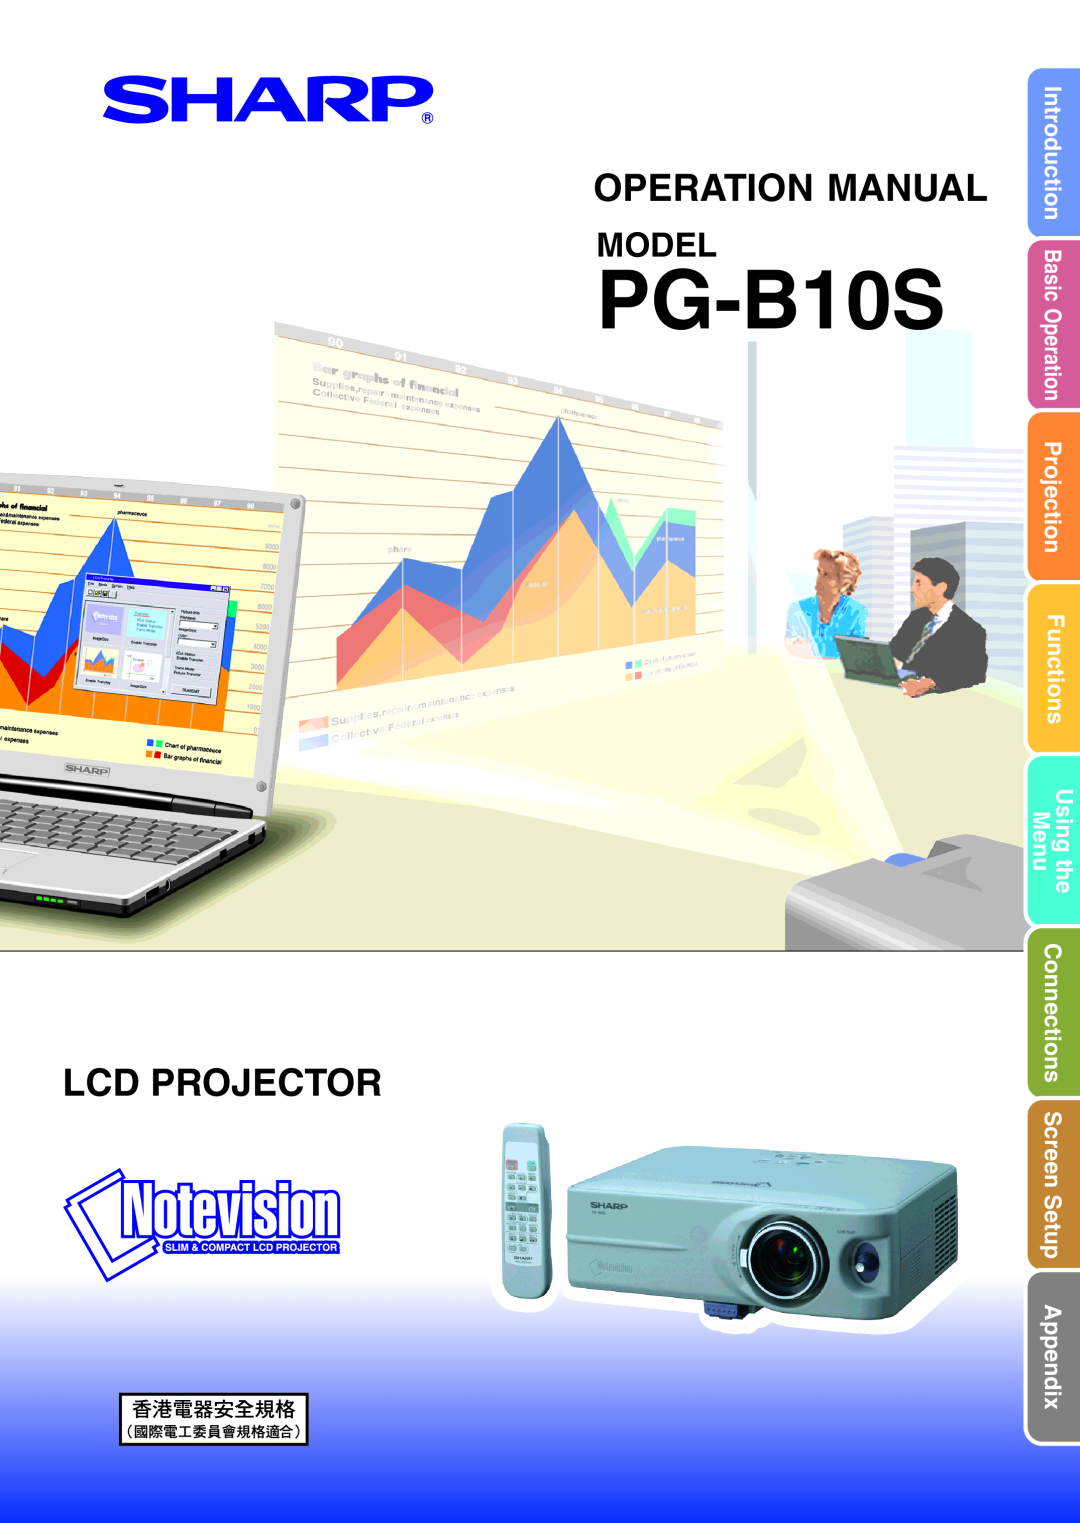 Sharp PG-B10S operation manual Model, Introduction, Projection Functions, the Connections Screen Setup Appendix, MenuUsing 